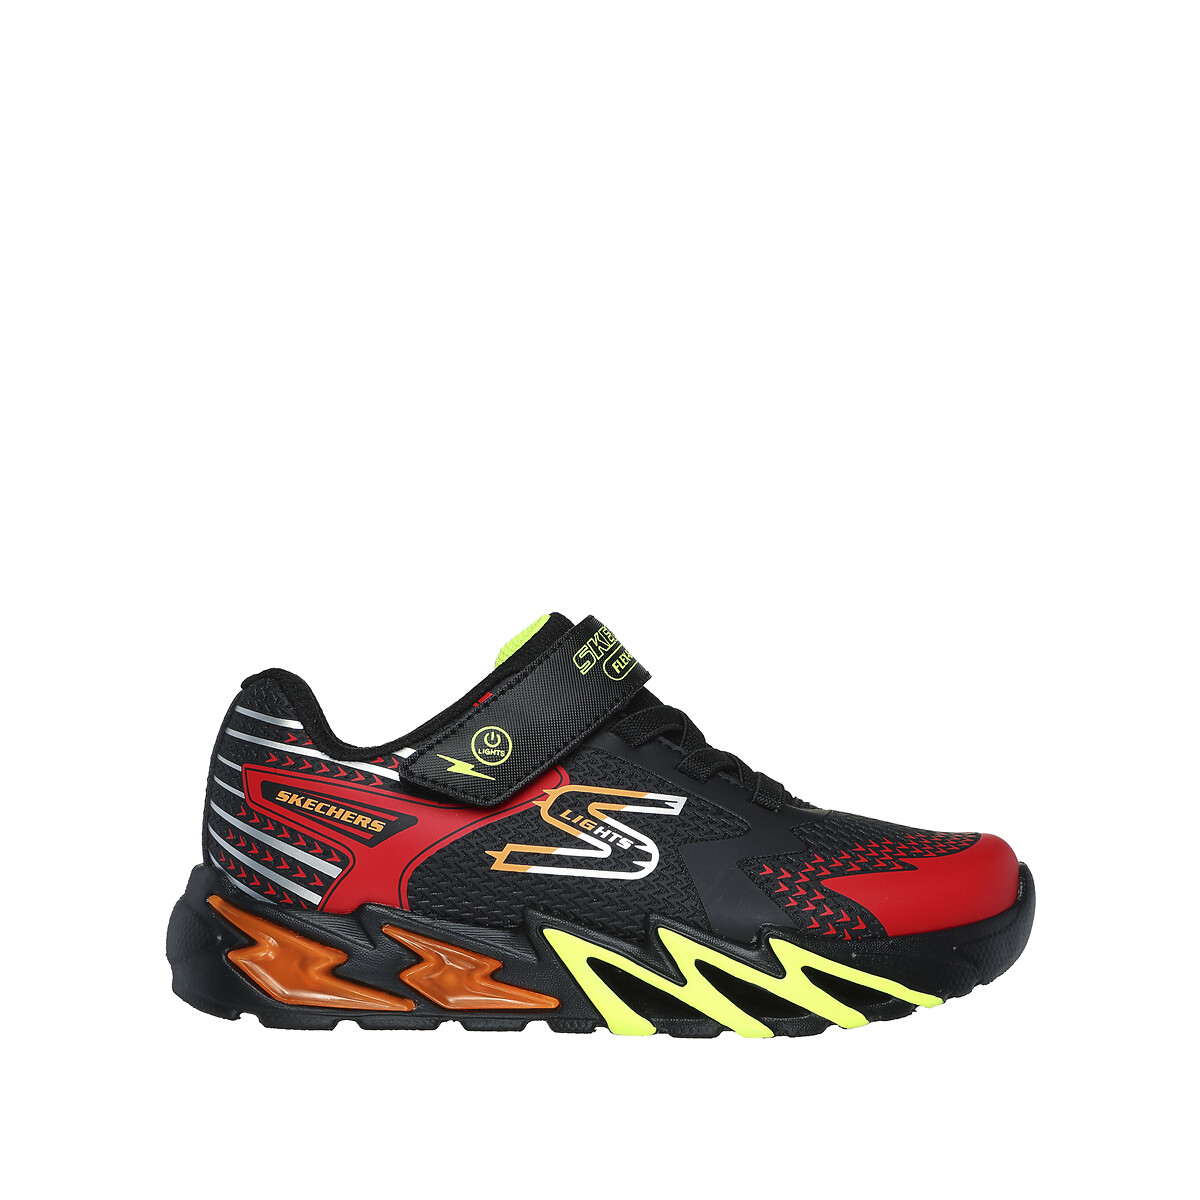 Image of Kids Flex-Glow Bolt Trainers with Touch 'n' Close Fastening